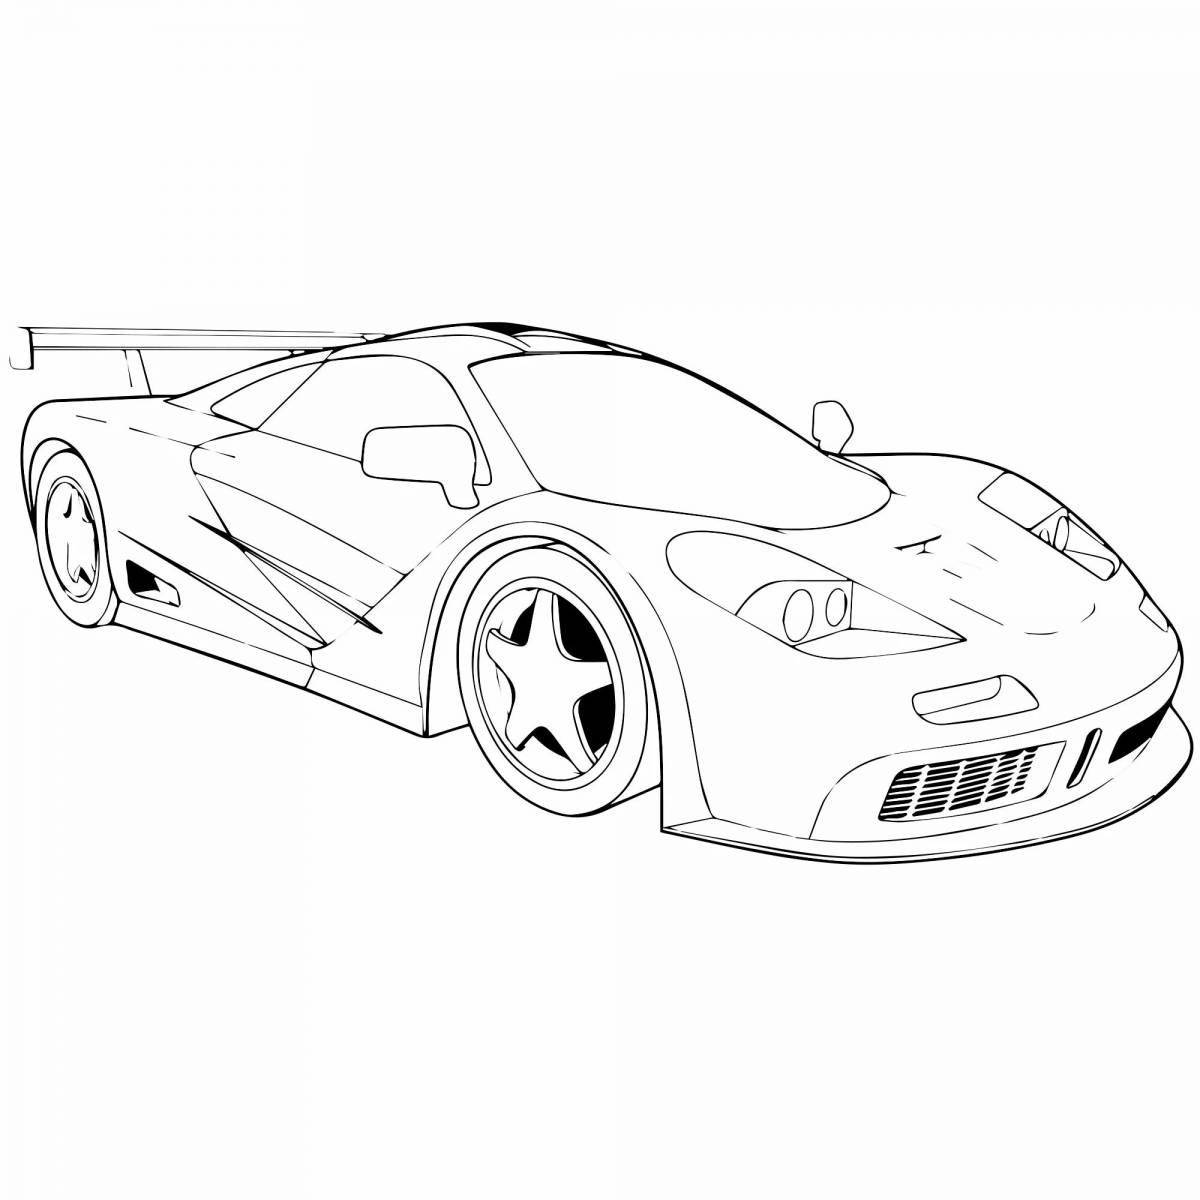 Coloring game playful car with remote control